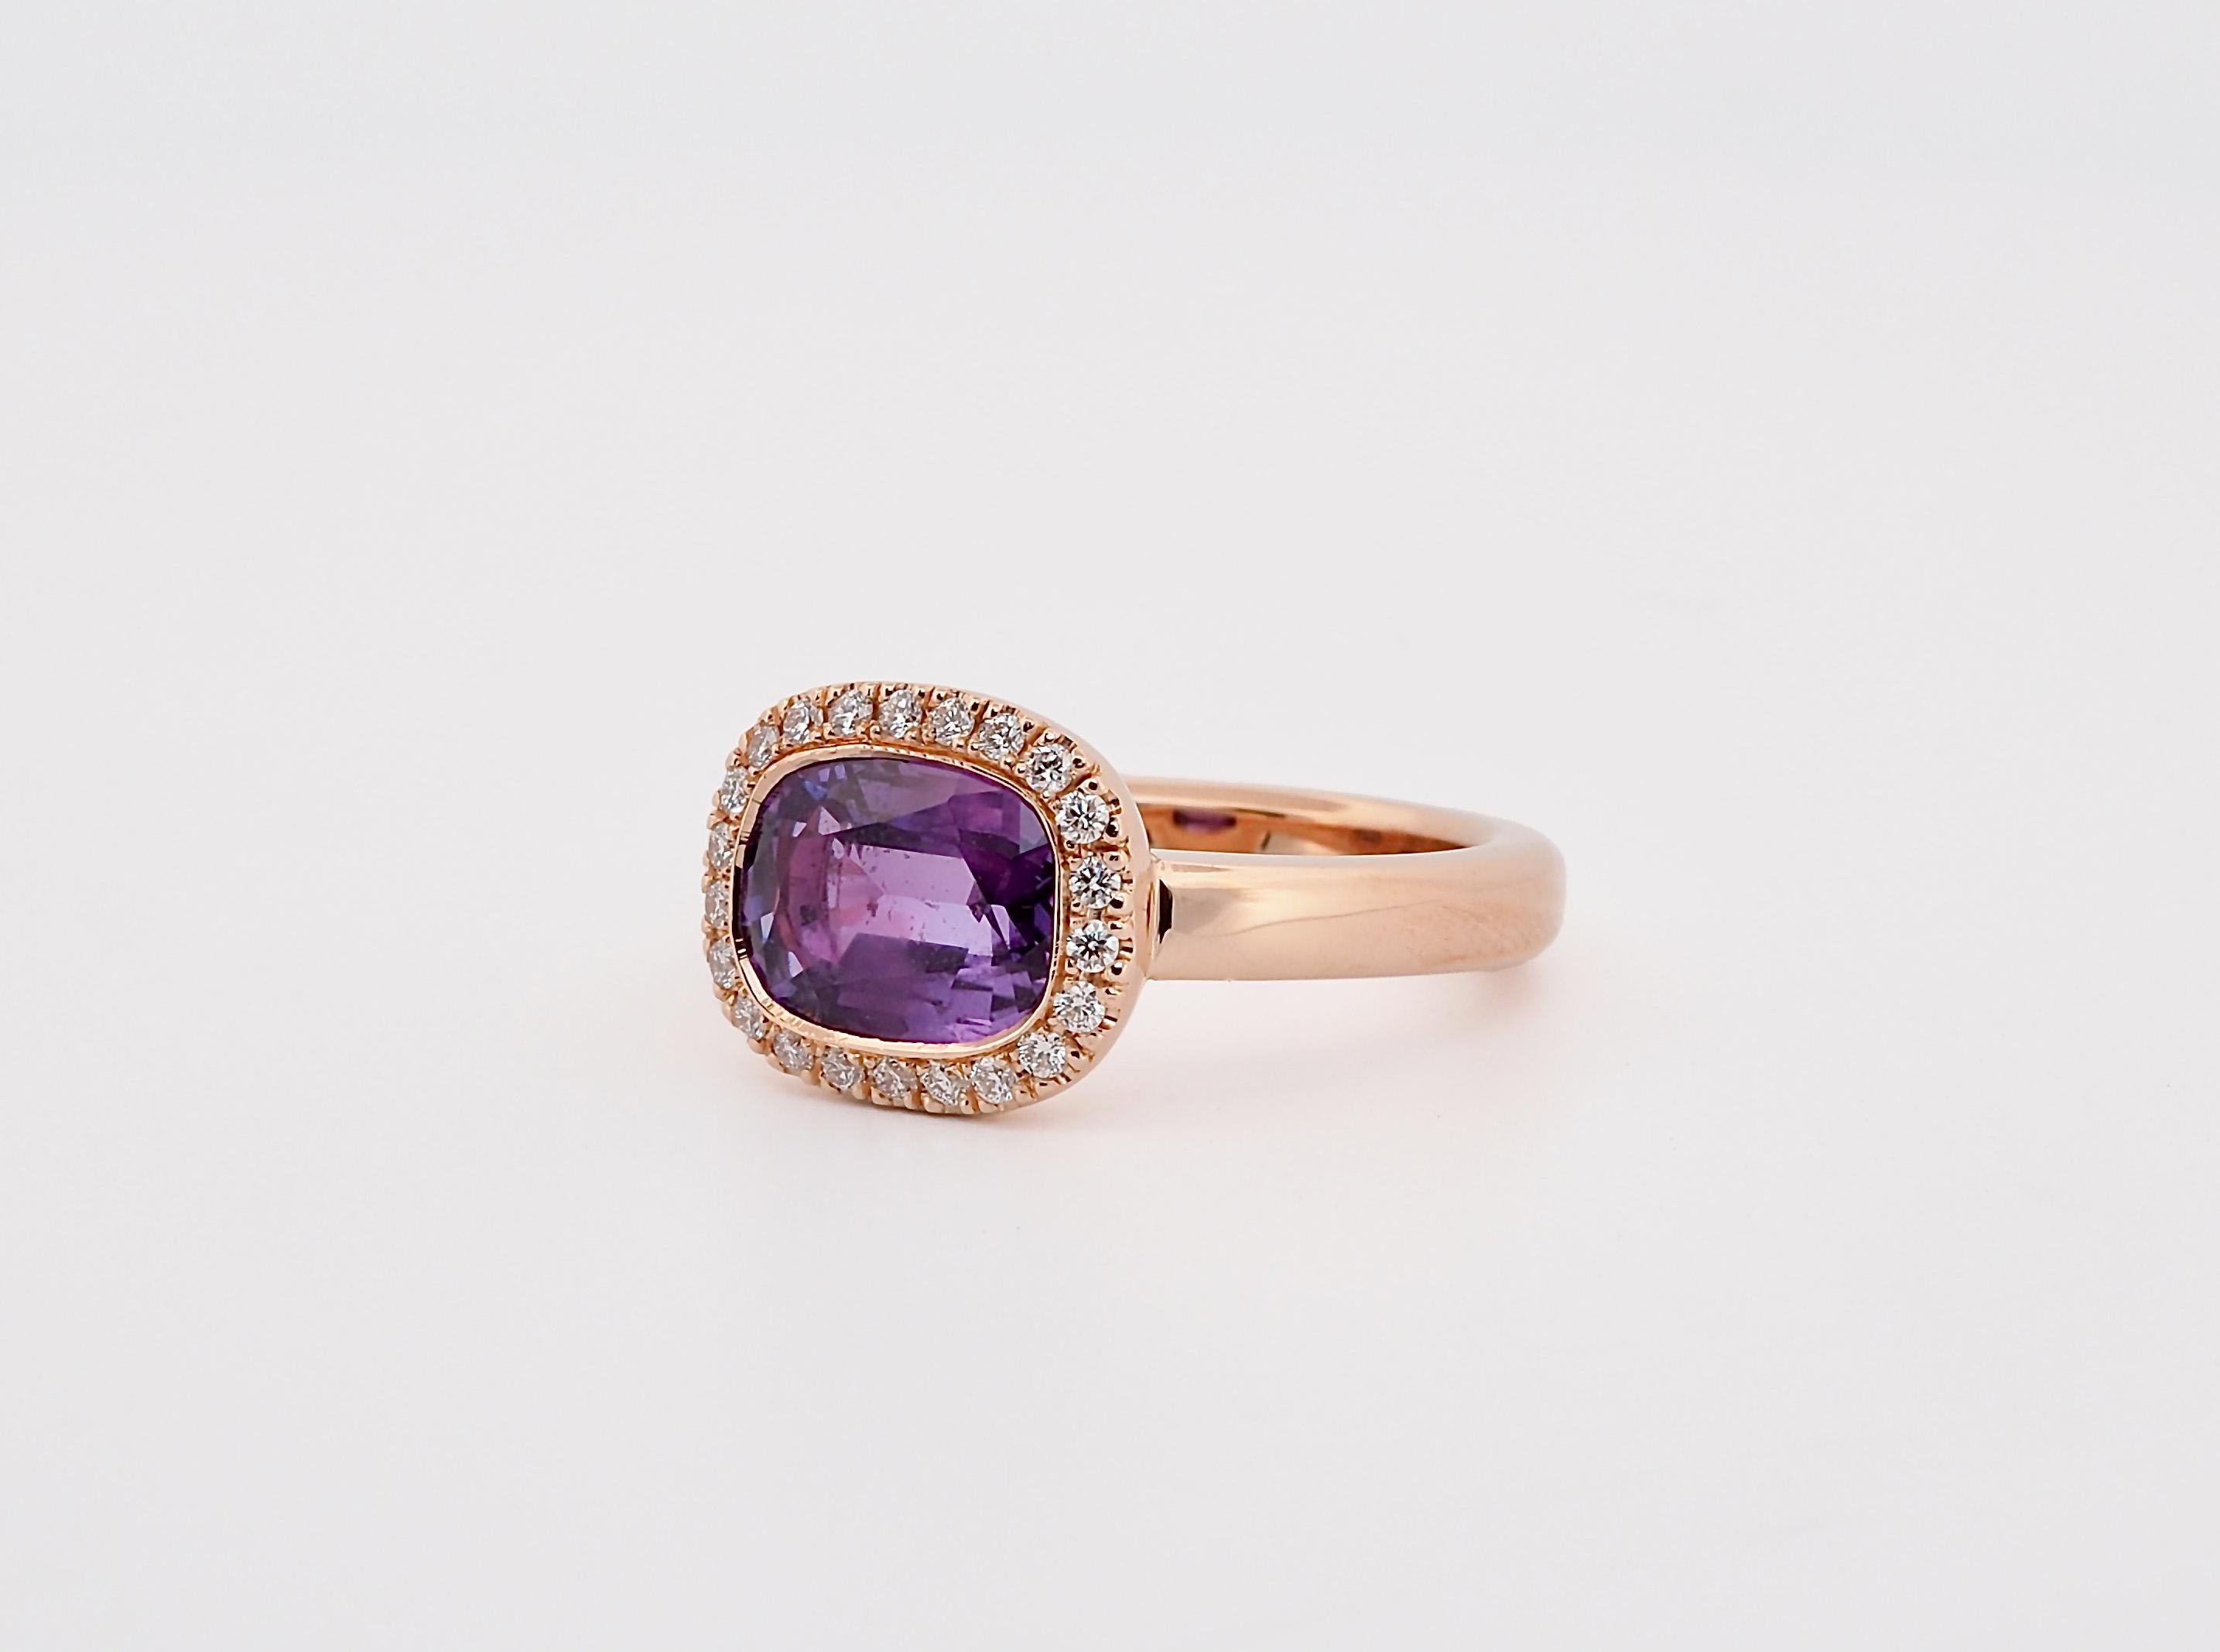 Stunning sapphire ring in rose gold 750 with diamond halo.
The stone charms with perfect proportion and an exceptional color, the purple is truly unique.